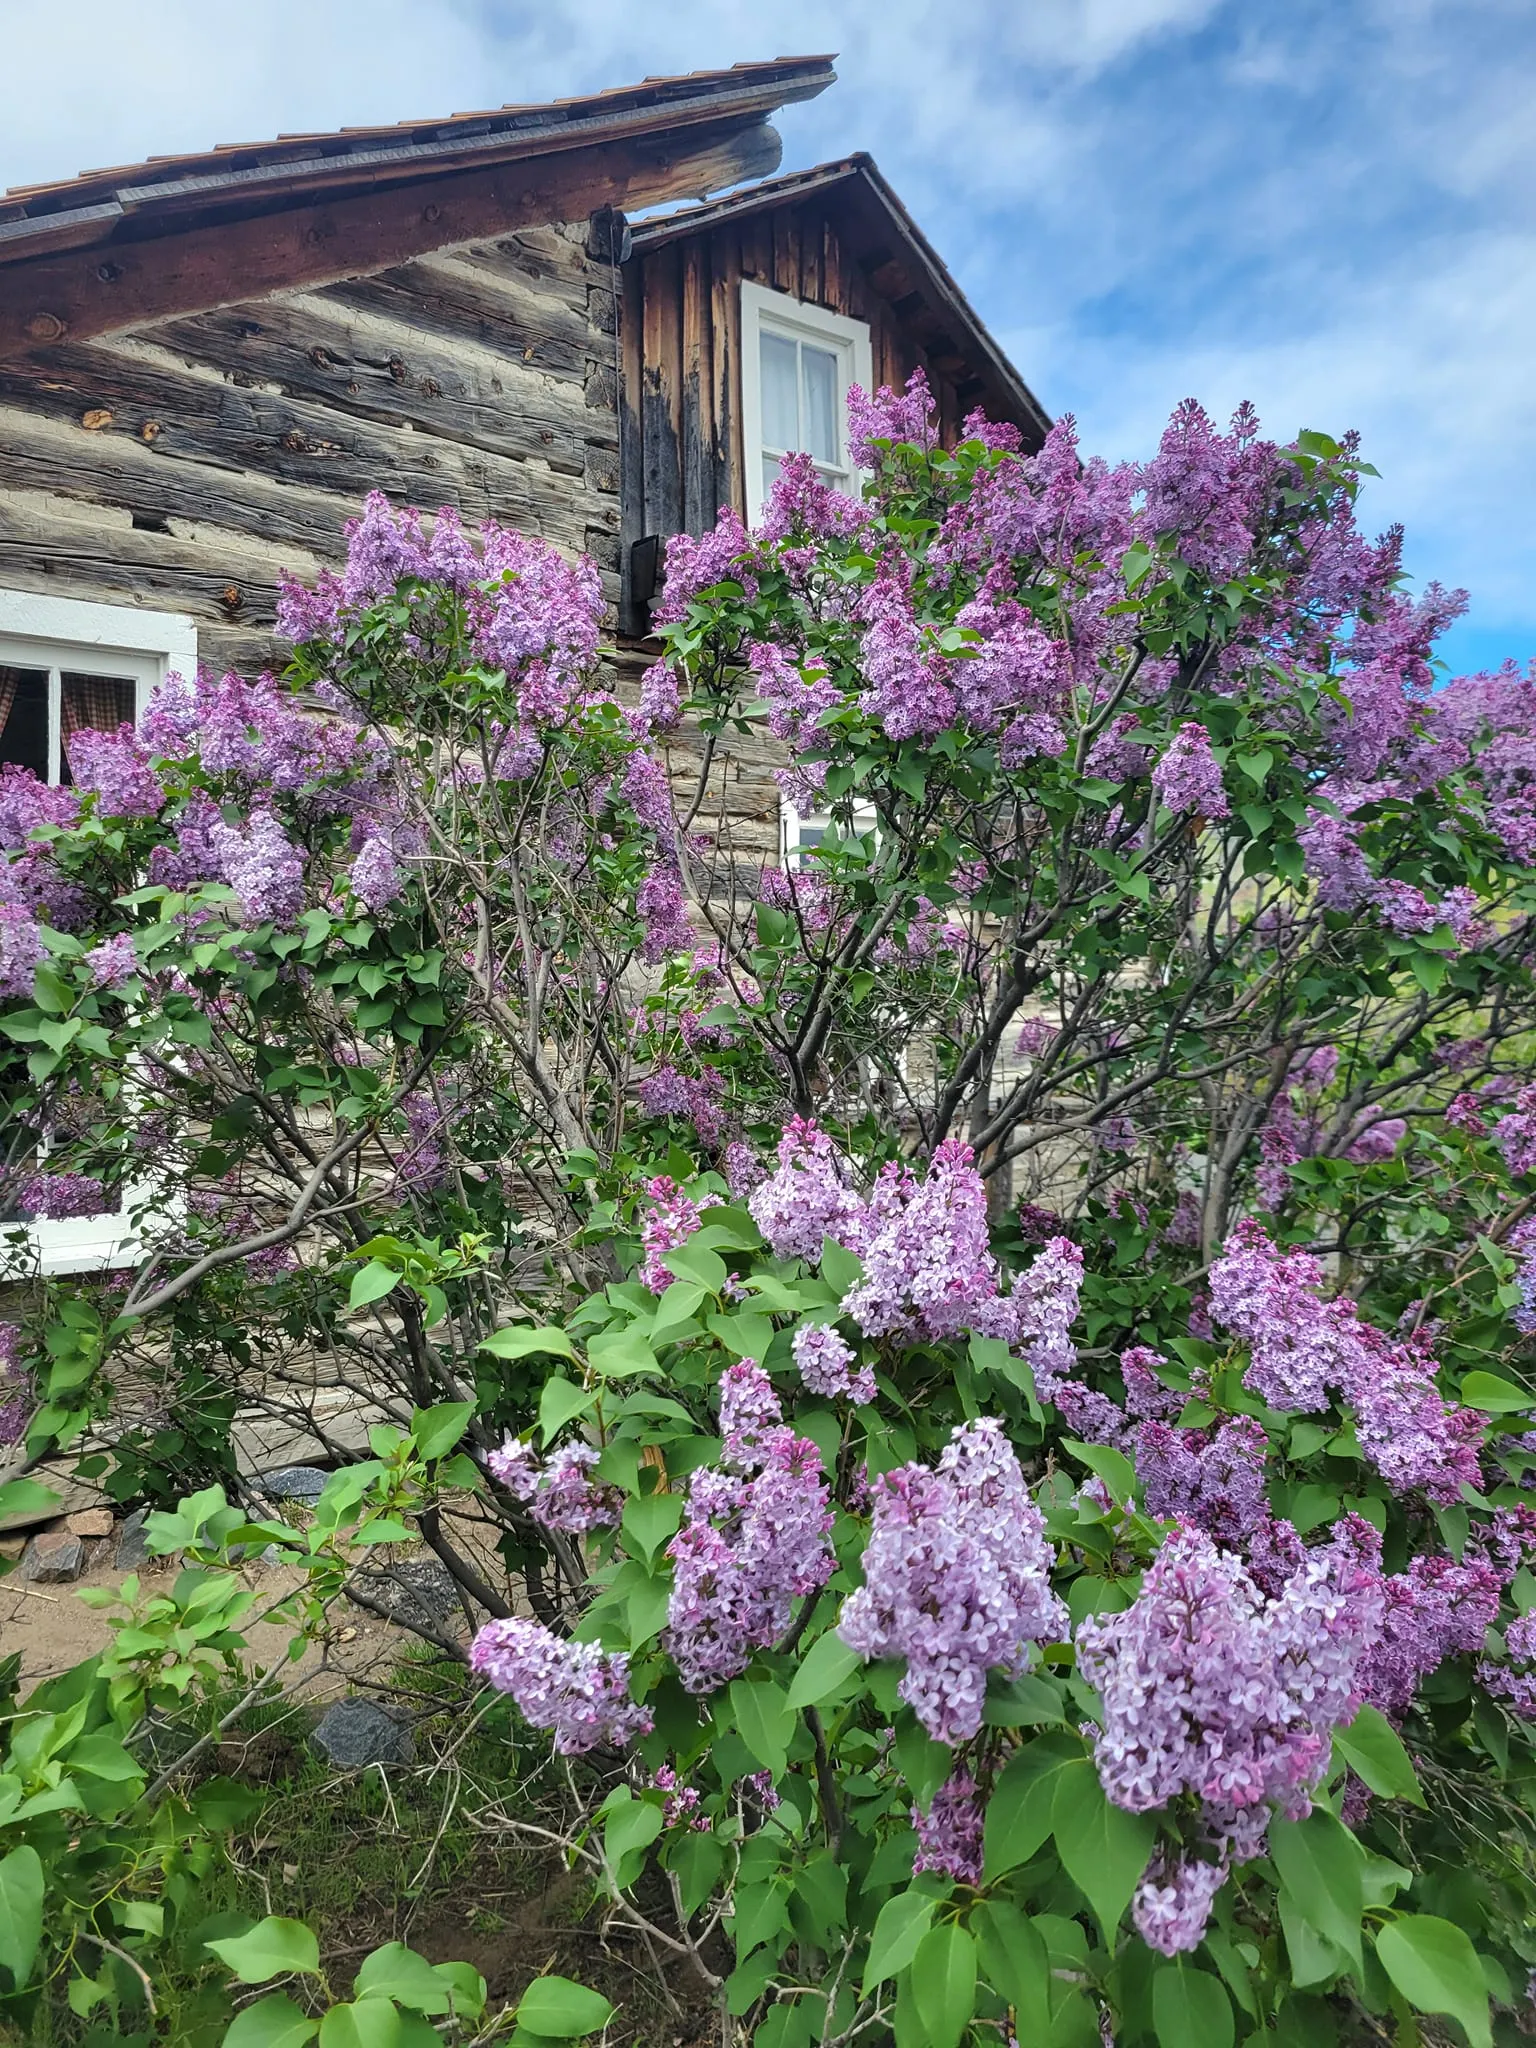 purple lilacs in full bloom with a log cabin in the background